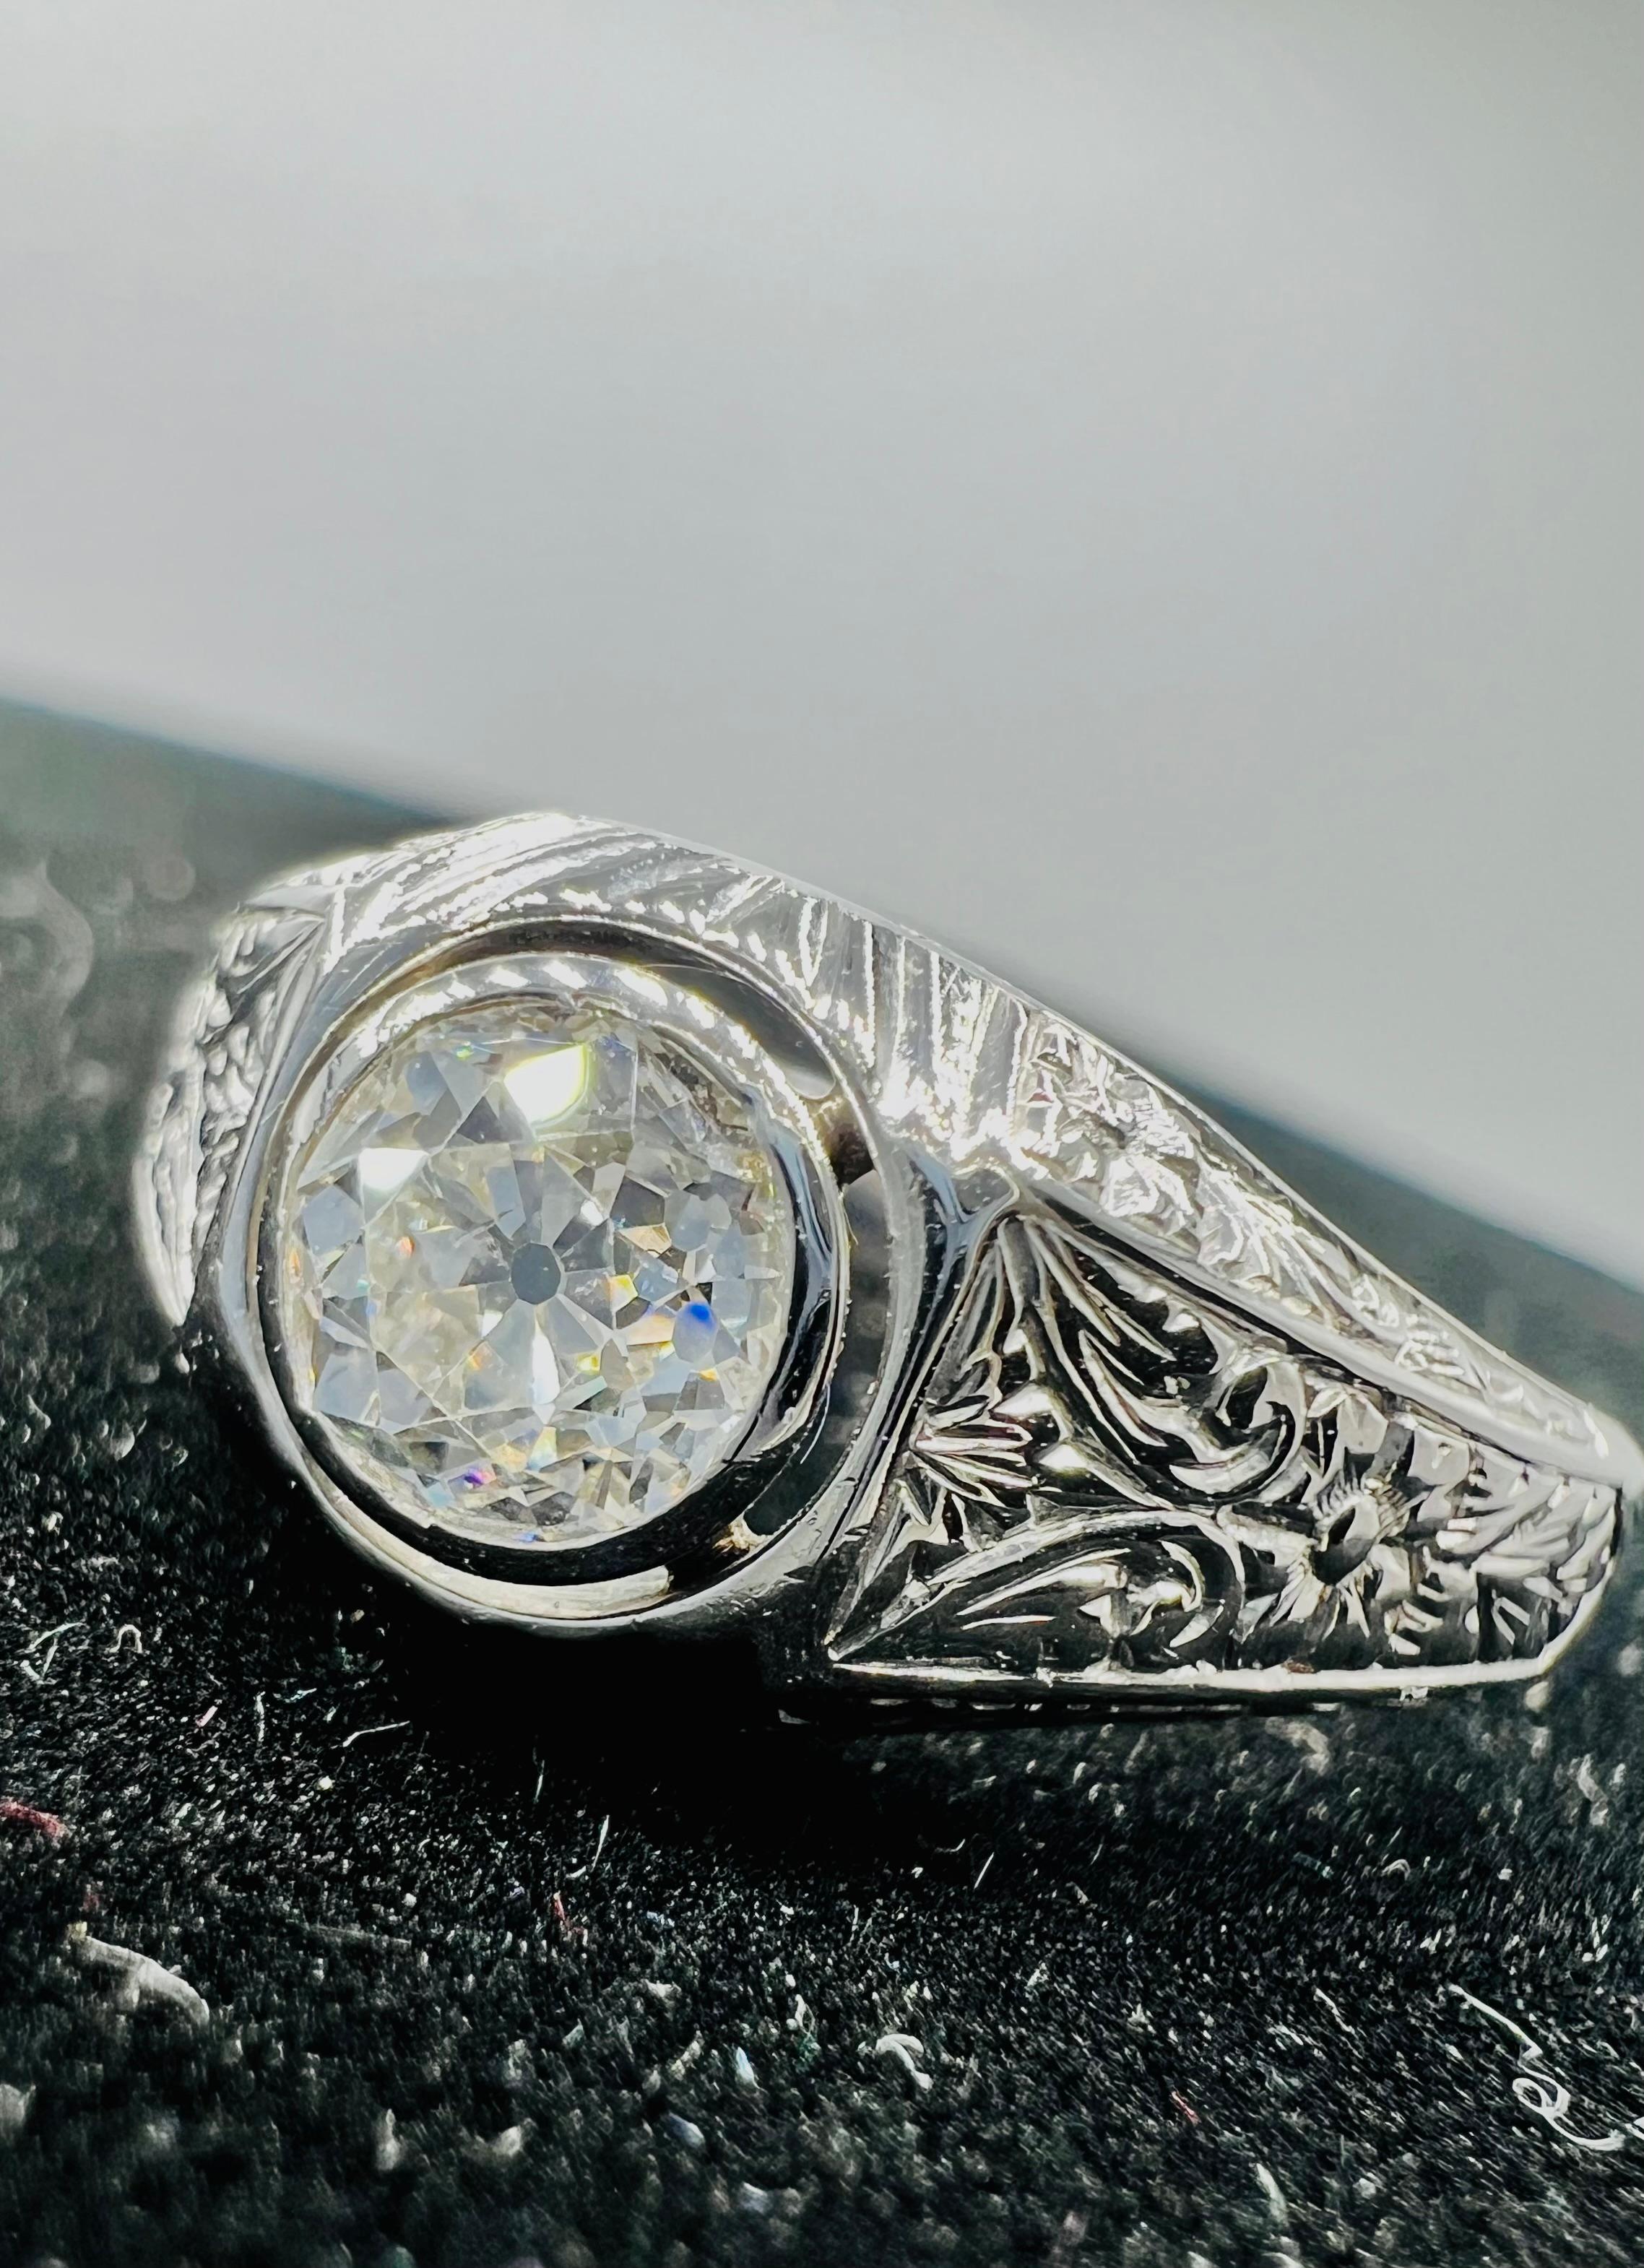 18 Carat White Gold Ring Set with a Diamond Old Cut of Around 1 Carat 3